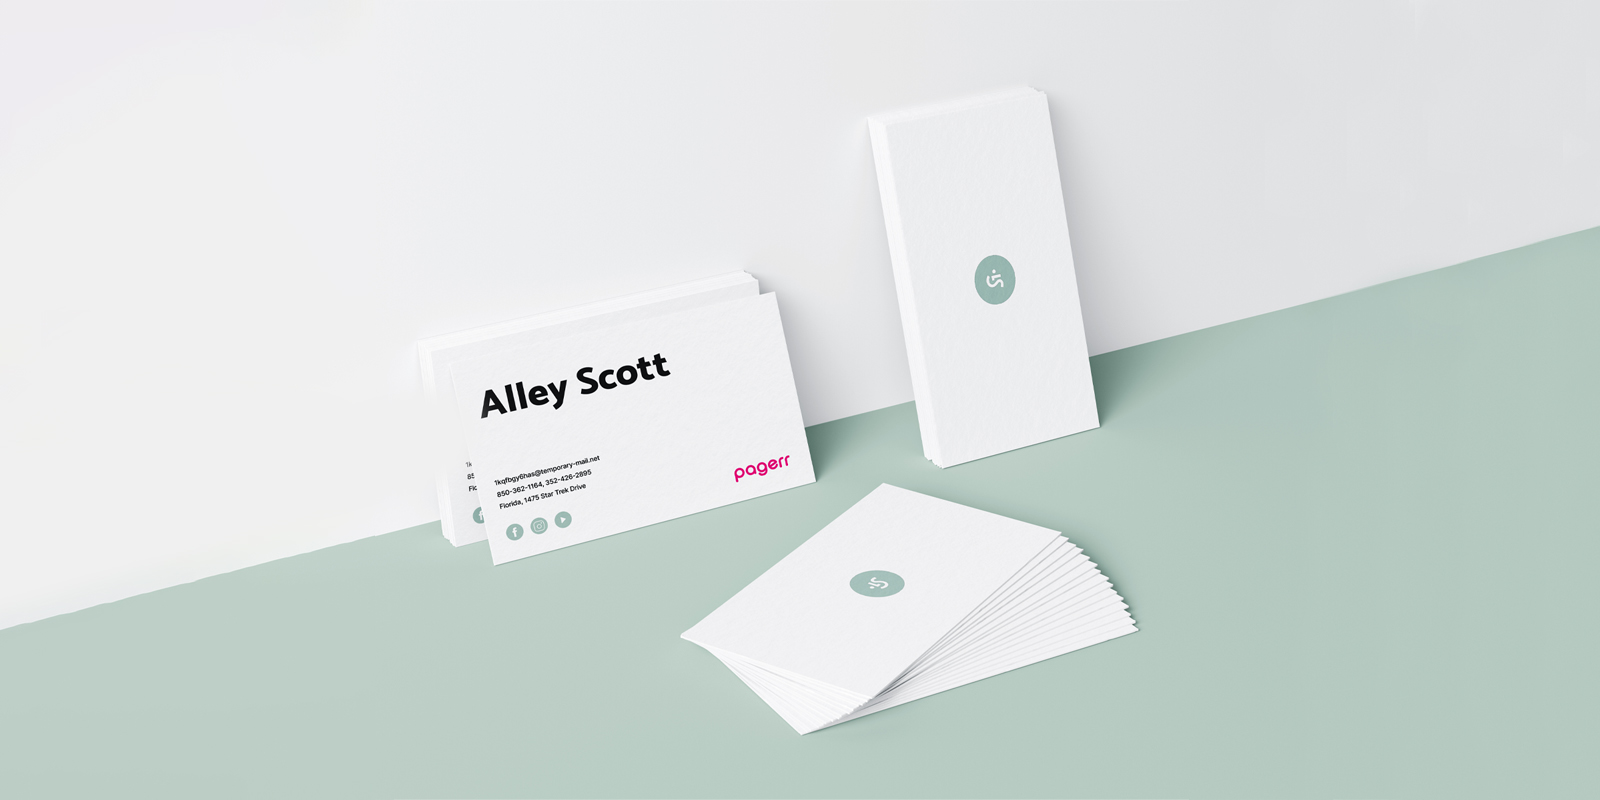 Business cards in Warsaw - Print with Pagerr